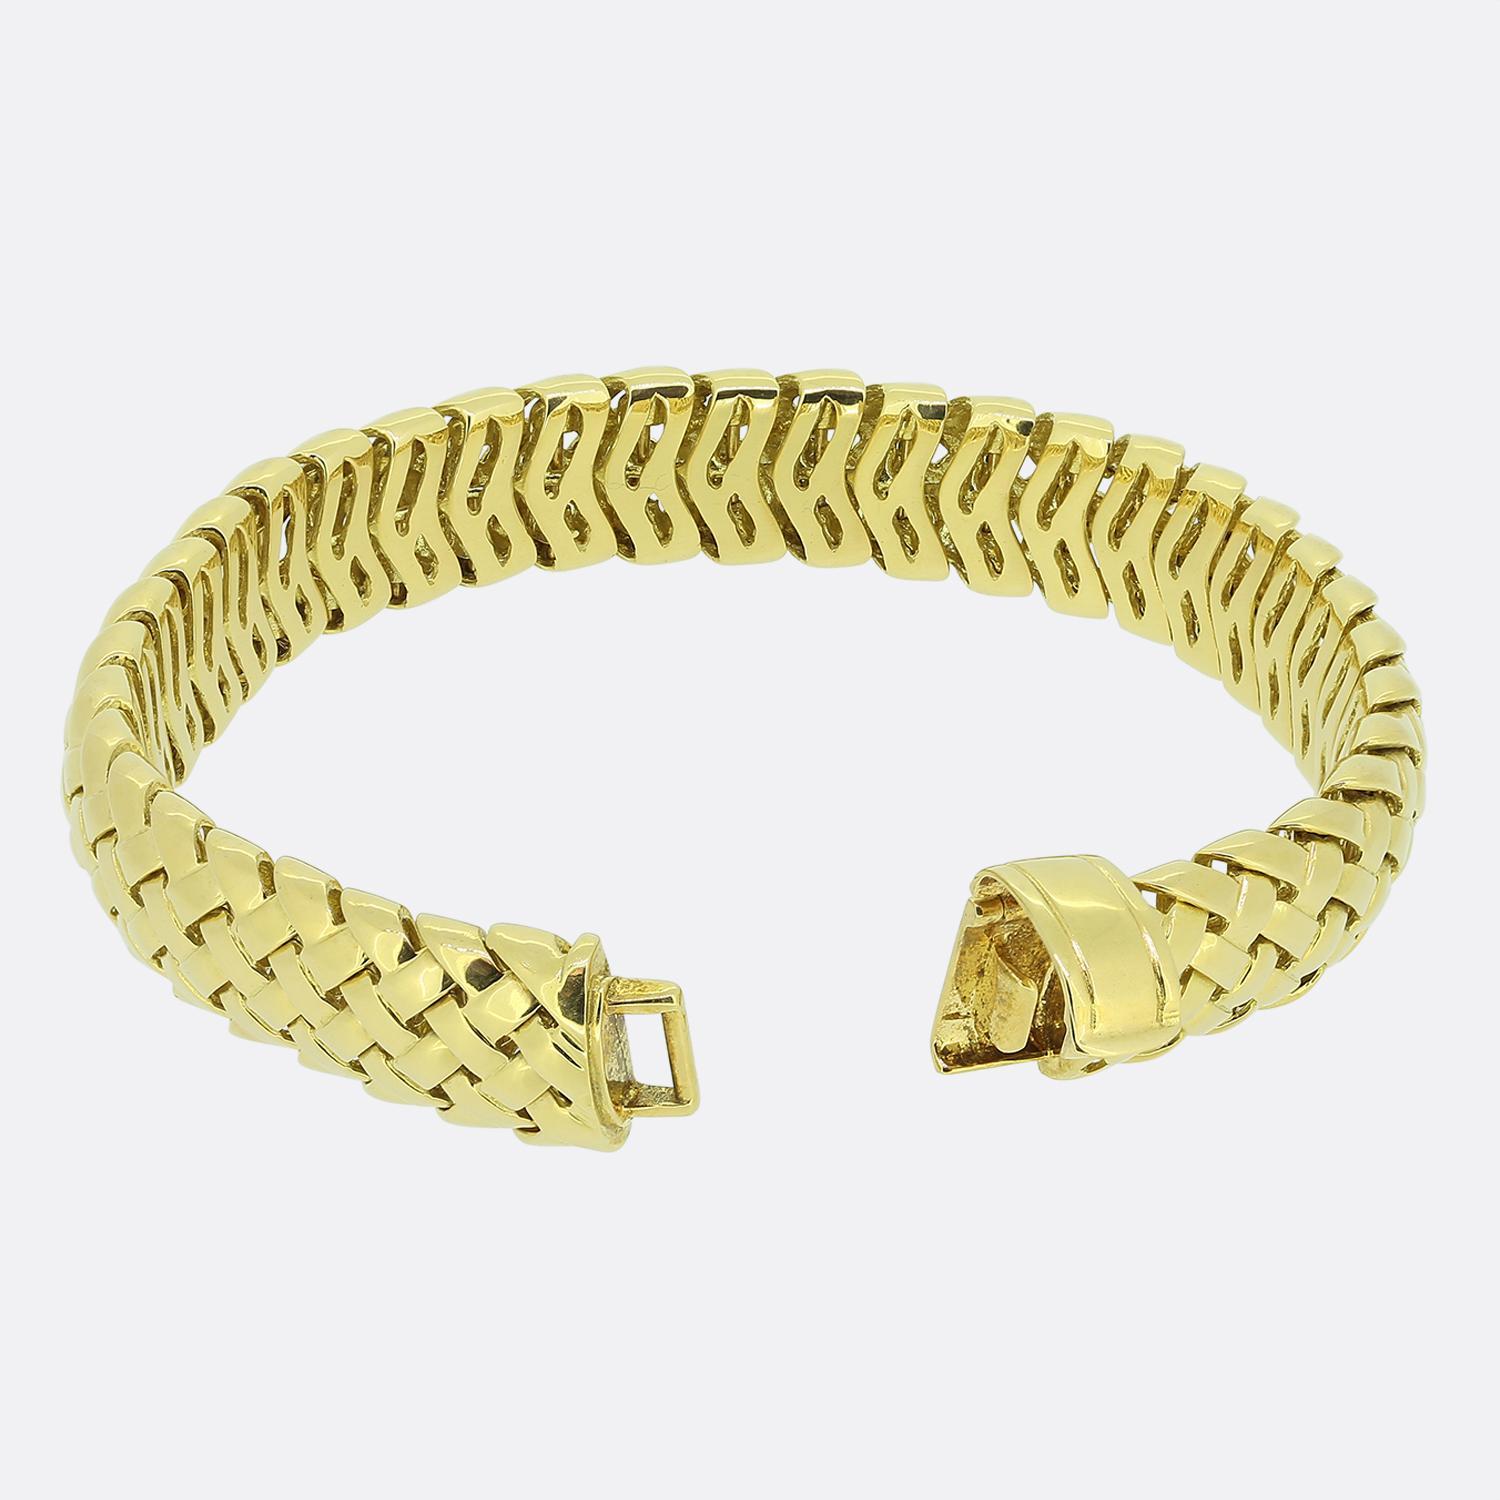 Here we have a vintage bracelet from the world renowned jewellery designer, Tiffany & Co. The name 'Vannerie' was taken from the art of Native American basketry hence the woven link craftsmanship from 18ct yellow gold and ultimate domed lattice